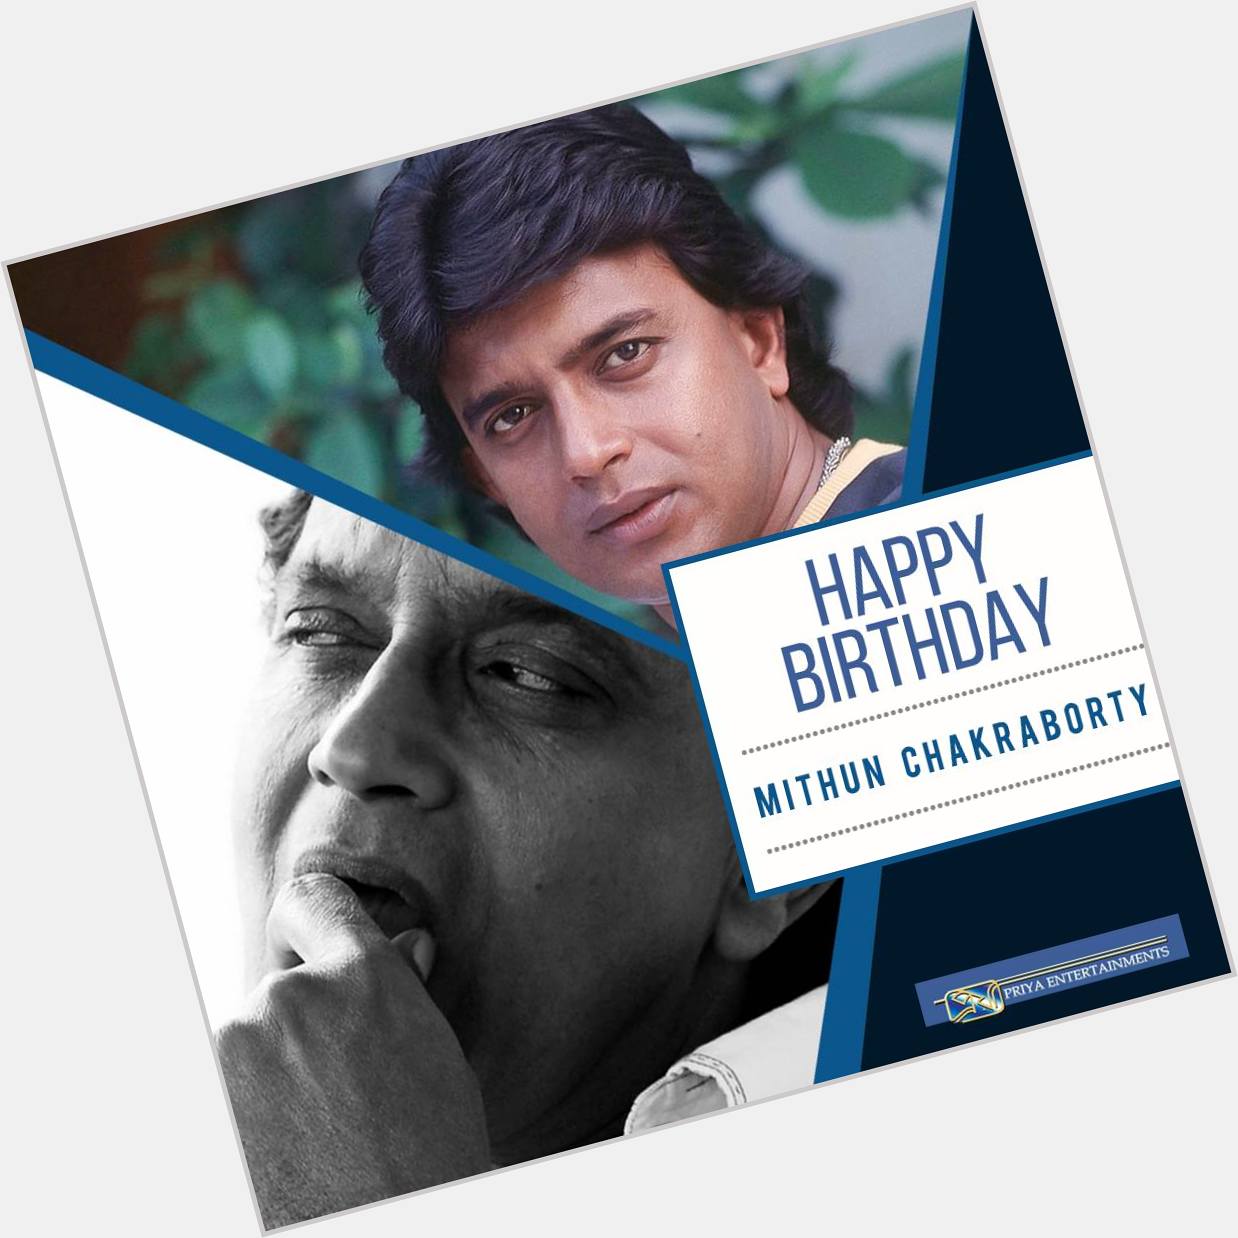 Happy Birthday to a true legend, a true humanitarian and a true star. Sending our best wishes Mithun Chakraborty. 